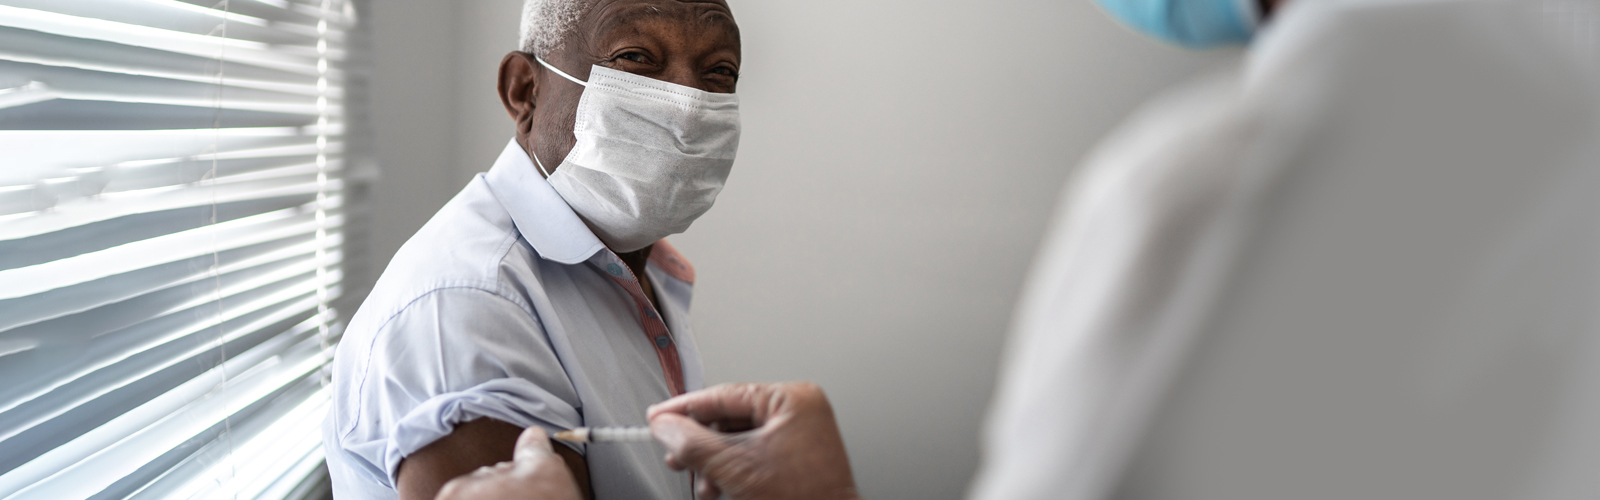 An older man receives his COVID-19 vaccination